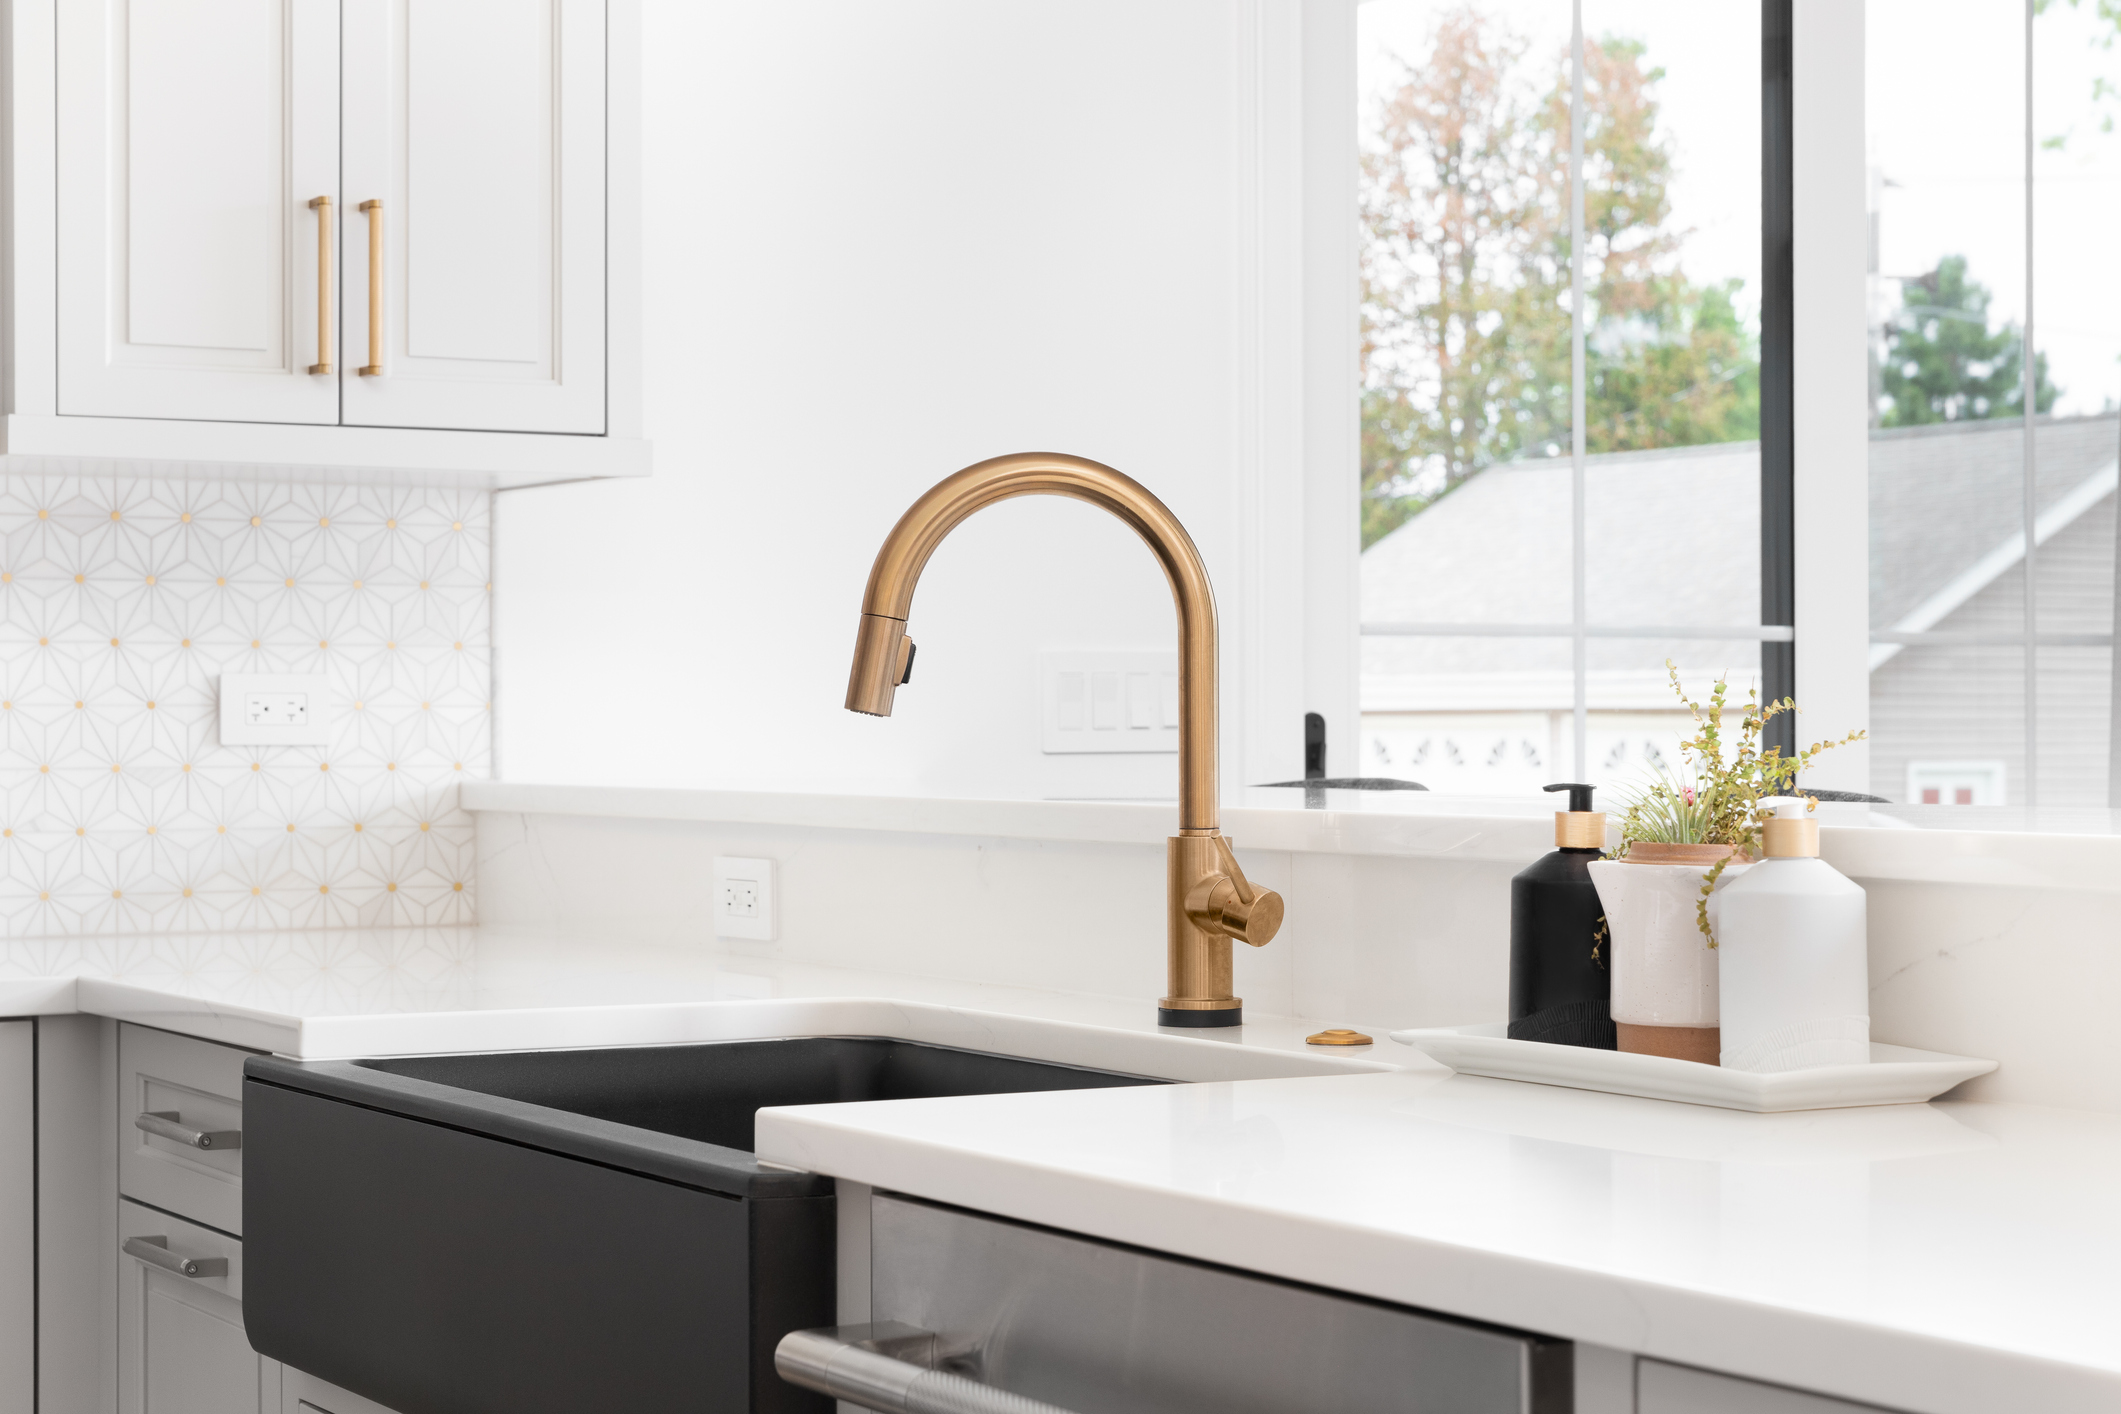 A modern kitchen sink with solid white stone complemented by gold accents shows the value of the right stone countertop in your kitchen.